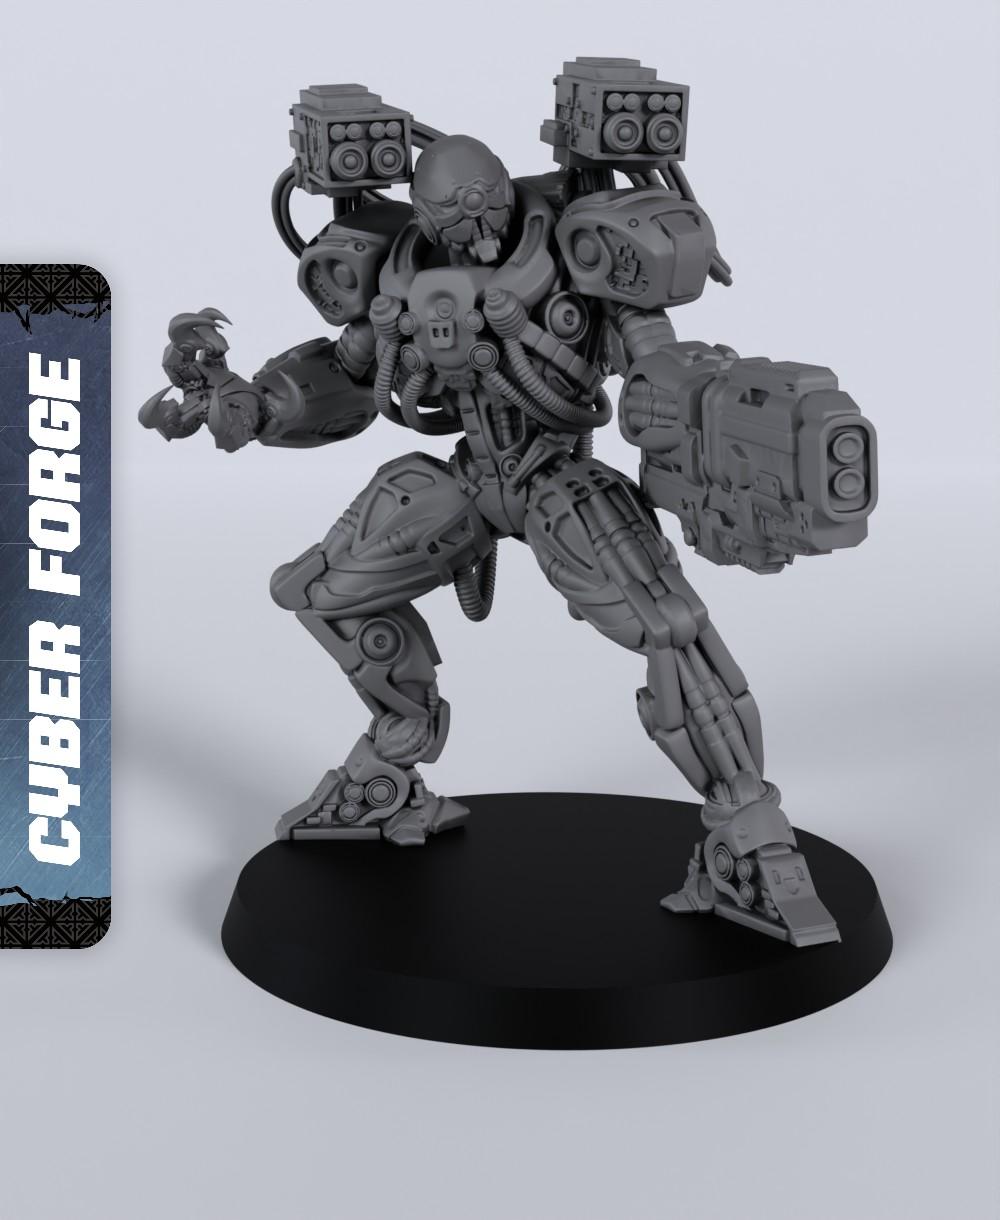 Corpo Eliminator - With Free Cyberpunk Warhammer - 40k Sci-Fi Gift Ideas for RPG and Wargamers 3d model